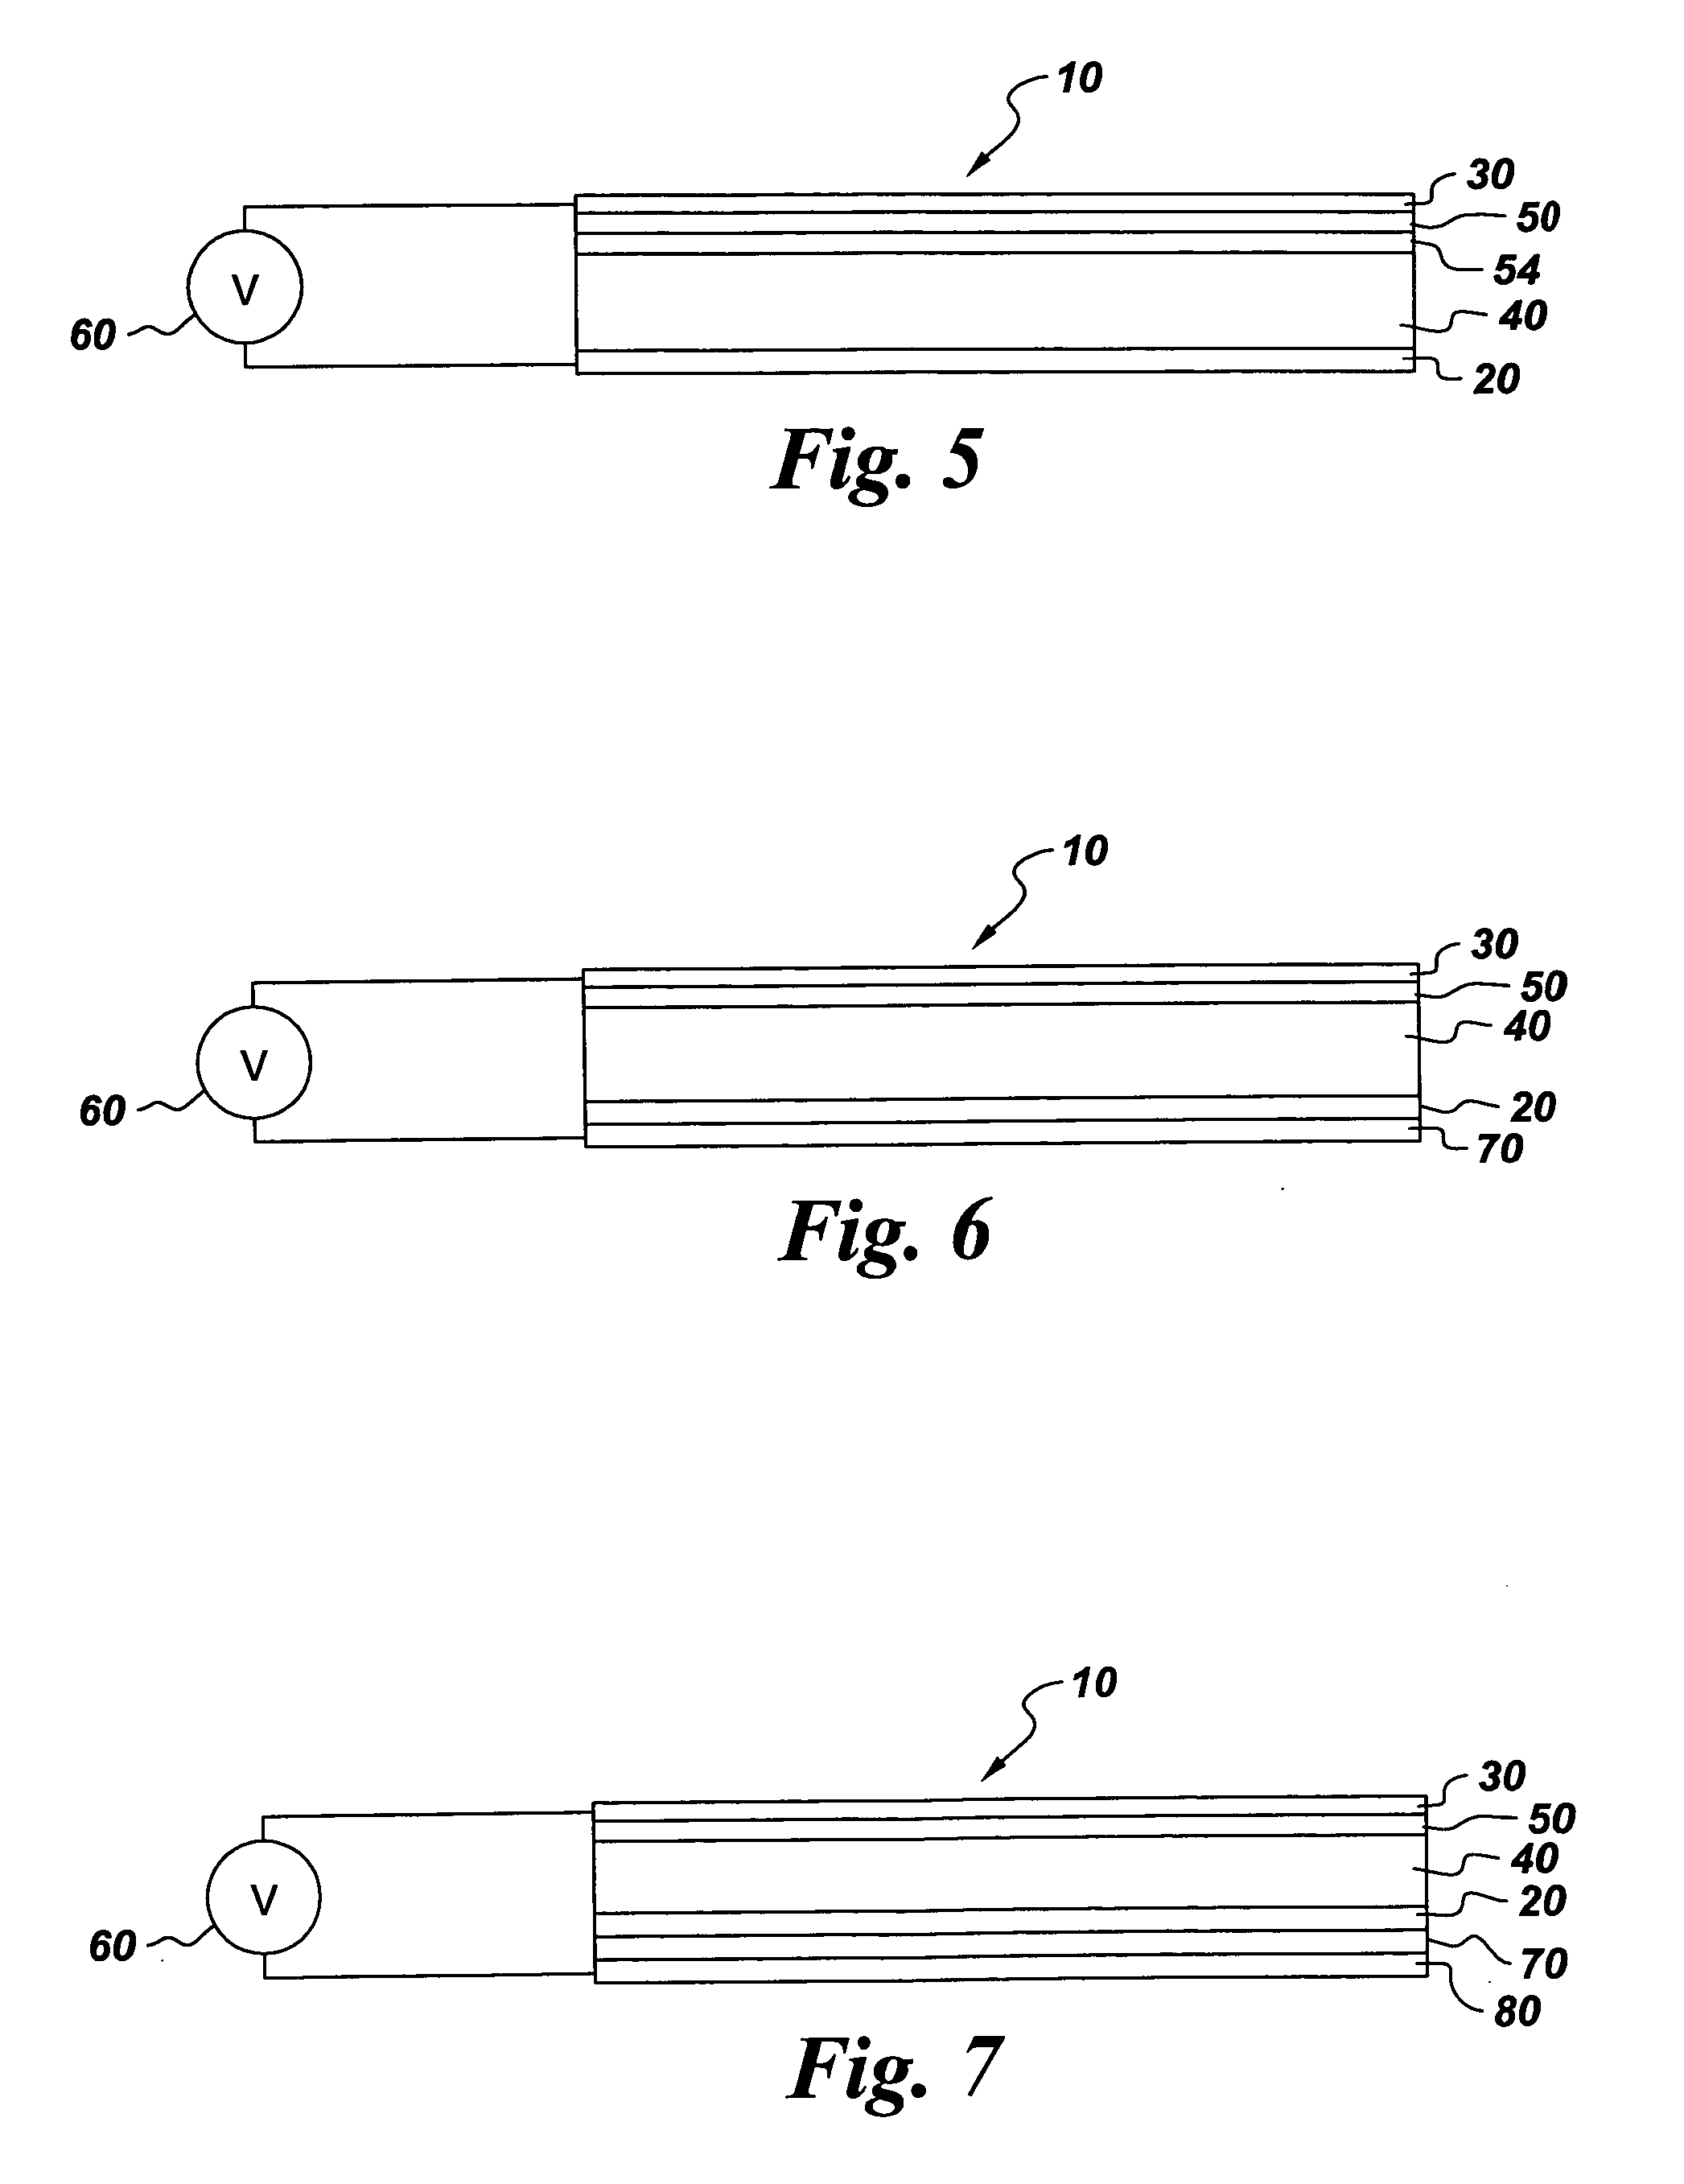 Charge transfer-promoting materials and electronic devices incorporating same